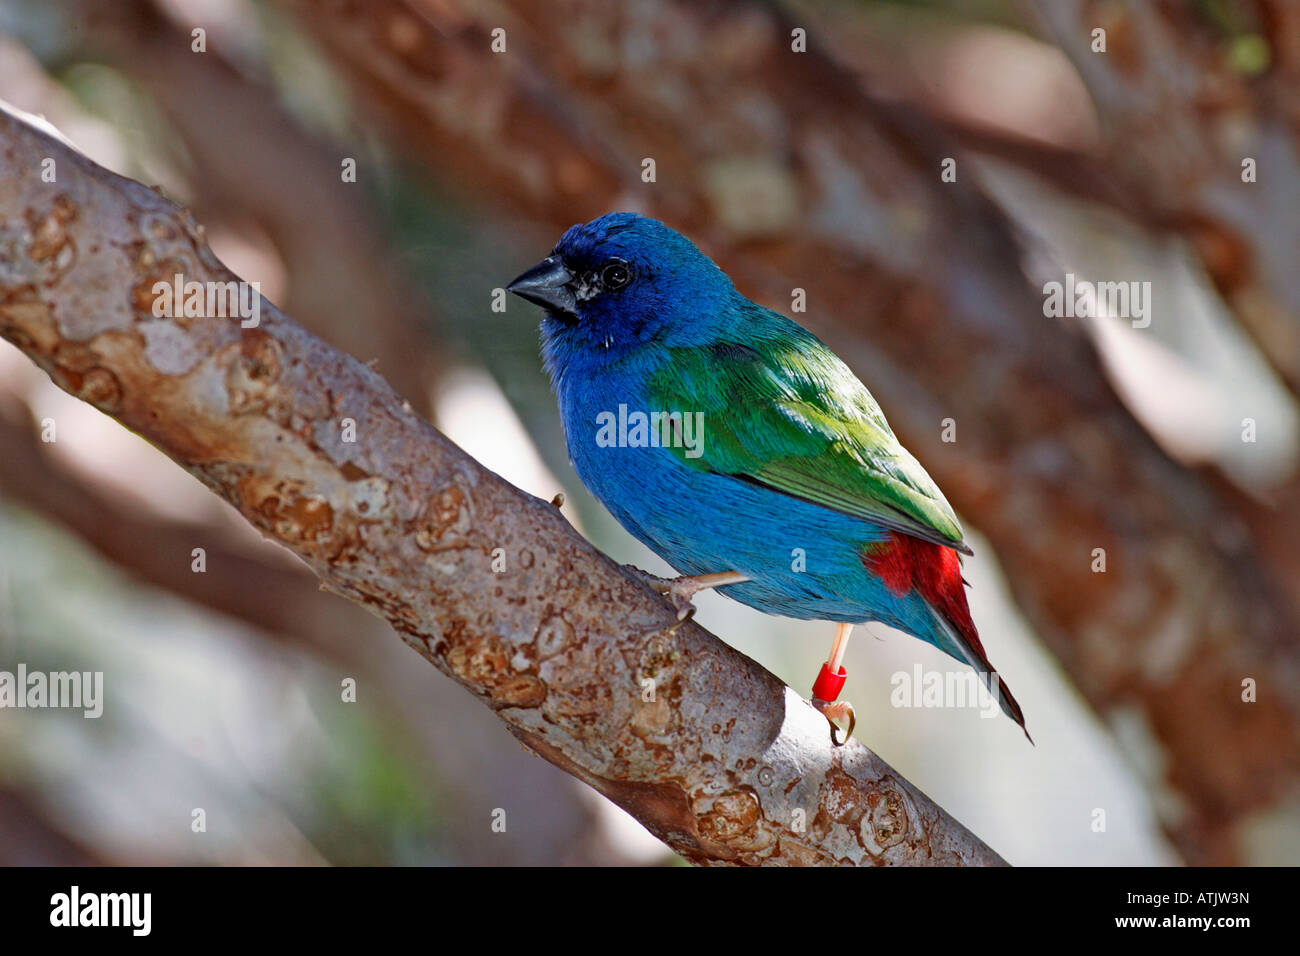 Tricolored Parrot Finch Stock Photo